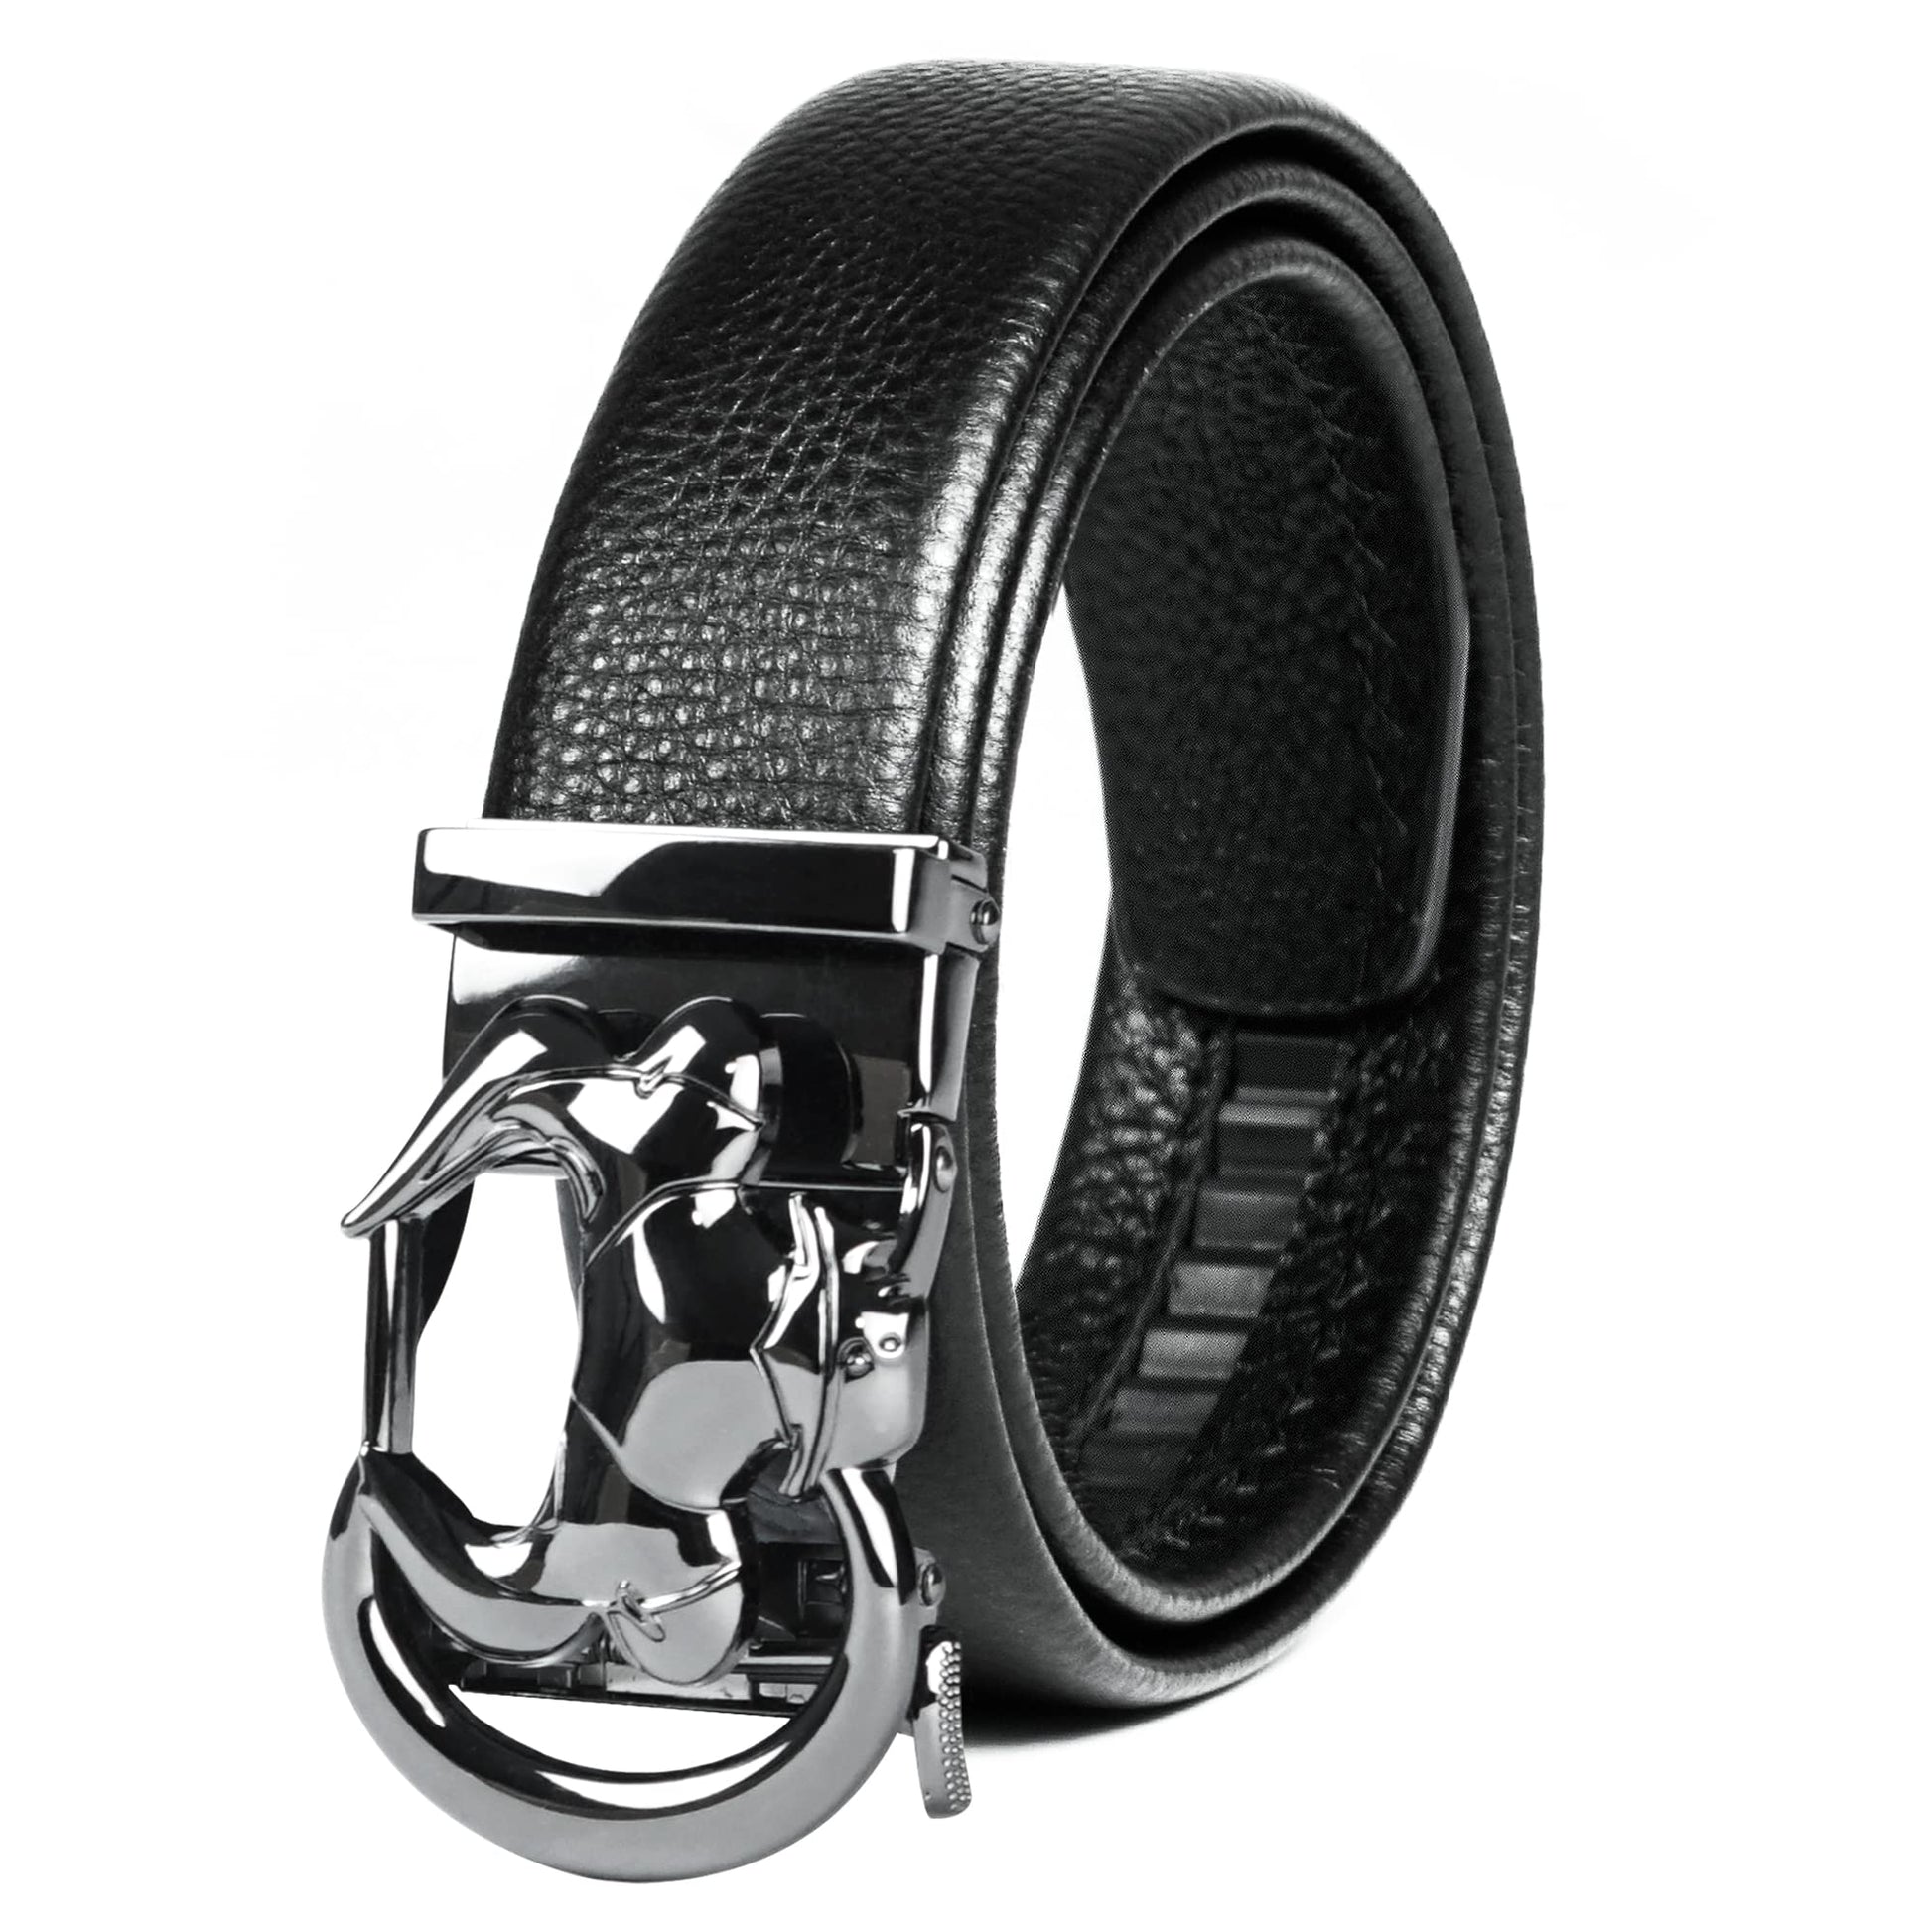 Coipdfty men's automatic buckle belt with black bull 